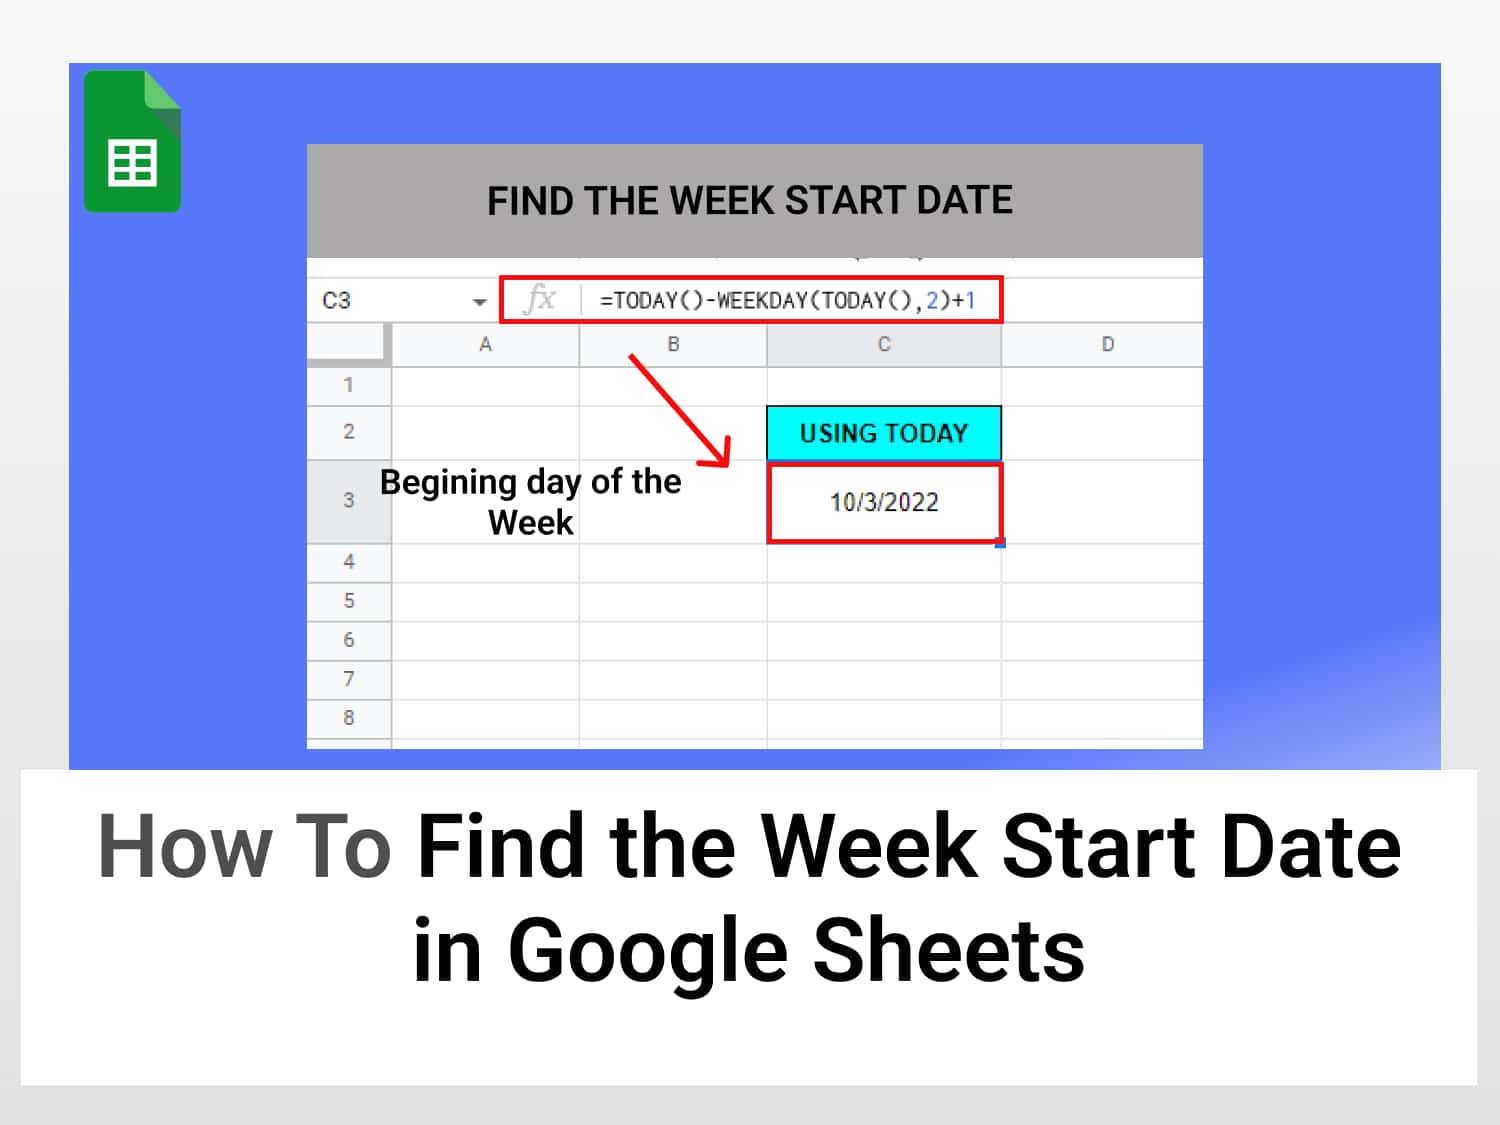 How to find the week start date in Google Sheets